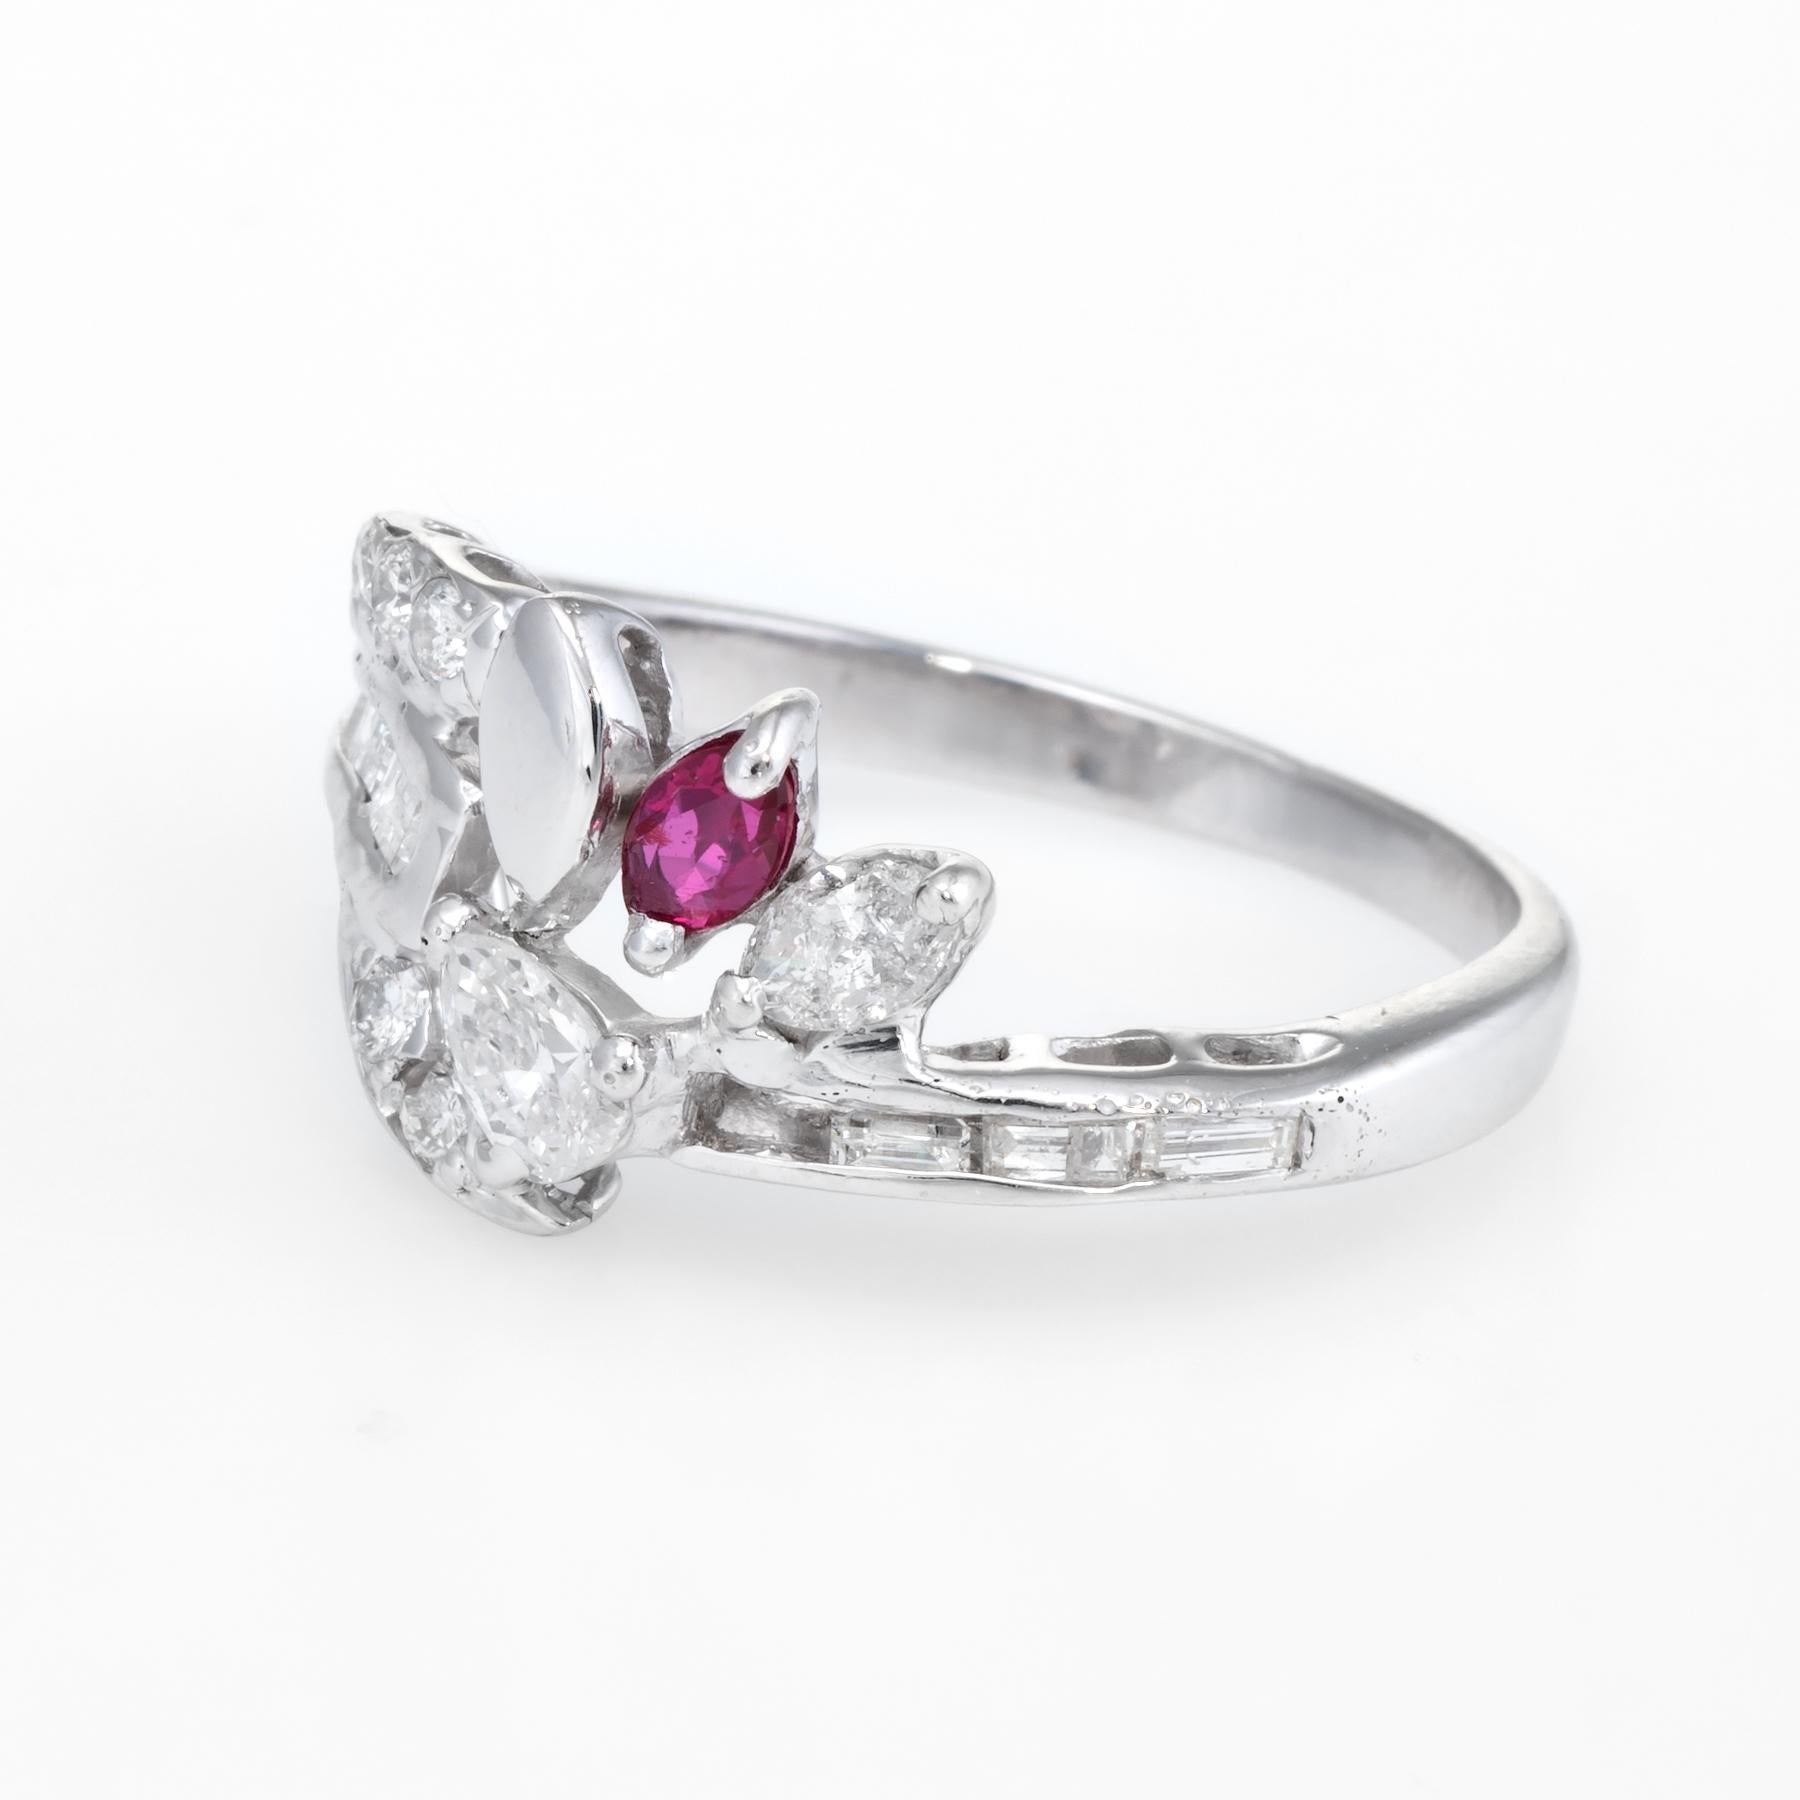 Mixed Cut Diamond Ruby Band Vintage Ring 14k White Gold Estate Fine Jewelry In Good Condition For Sale In Torrance, CA